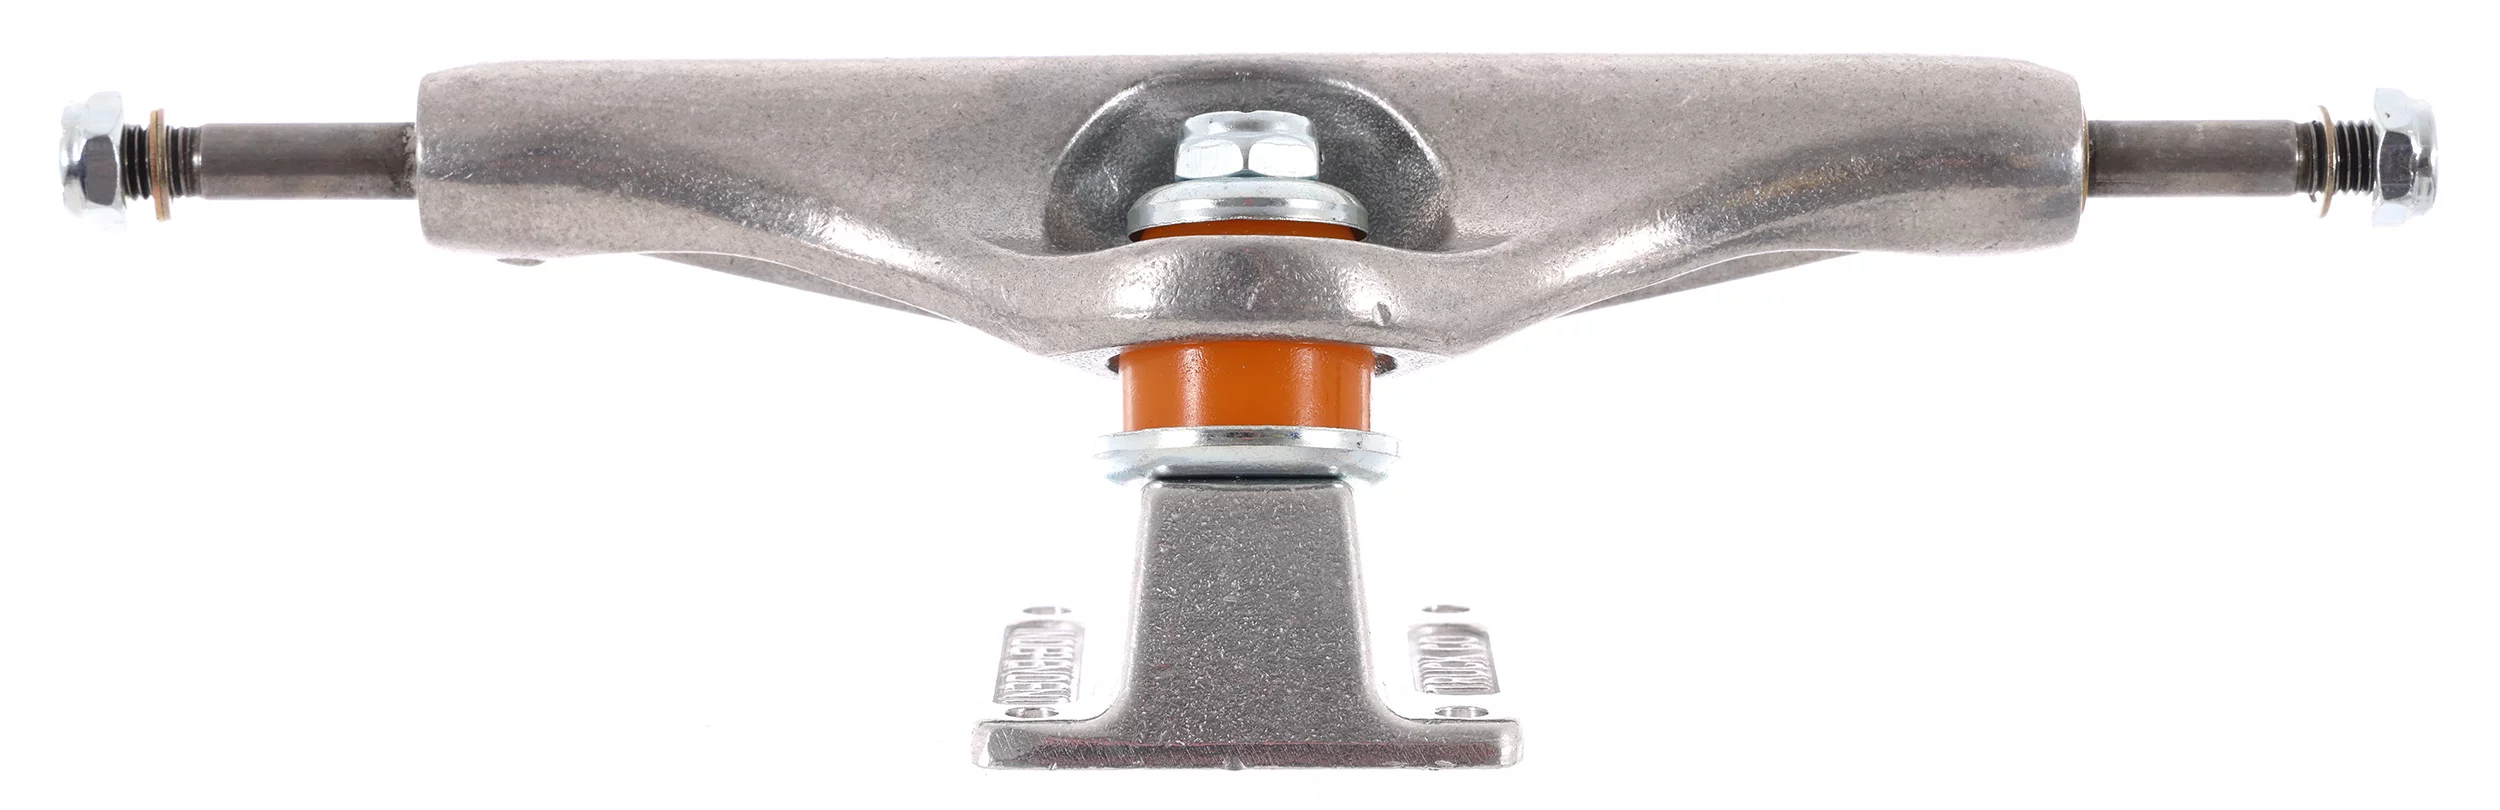 Independent Forged Hollow Stage 11 Skateboard Trucks - silver 159 